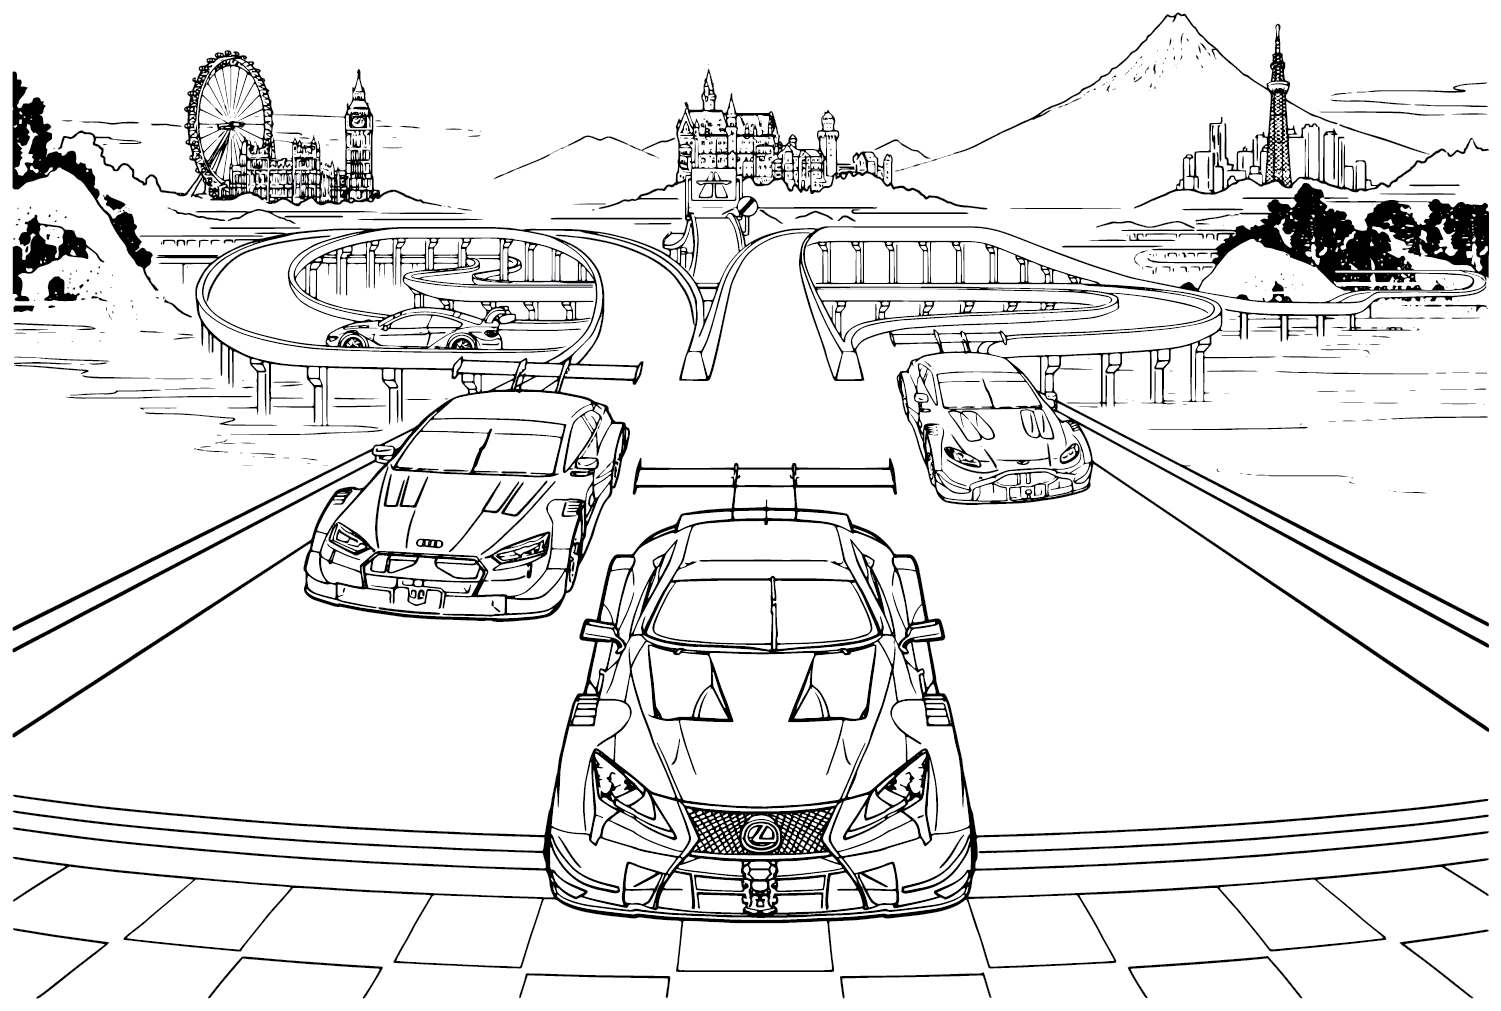 Lexus LC 500 Coloring Page to Print